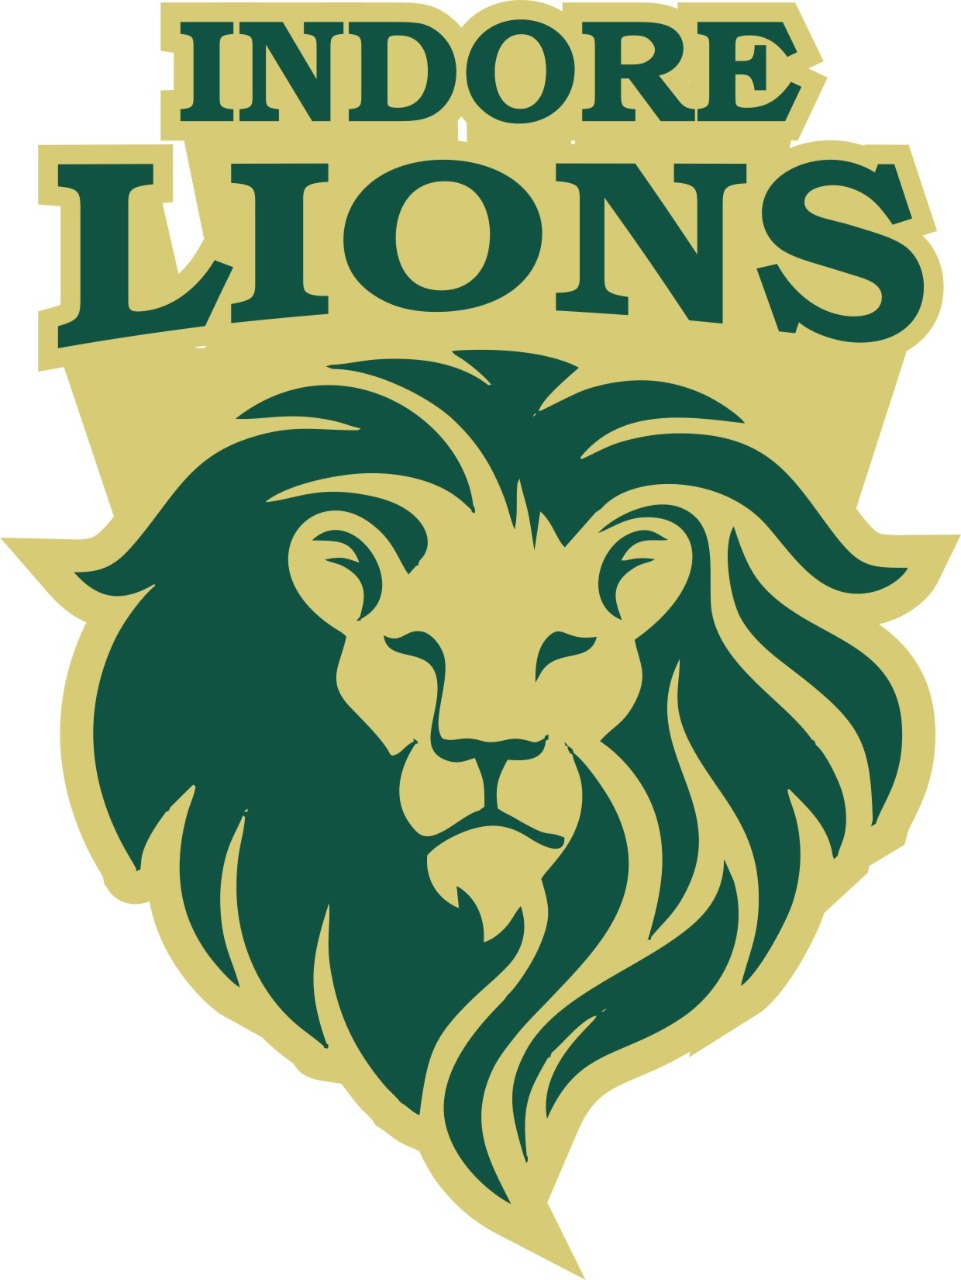 Indore Lions